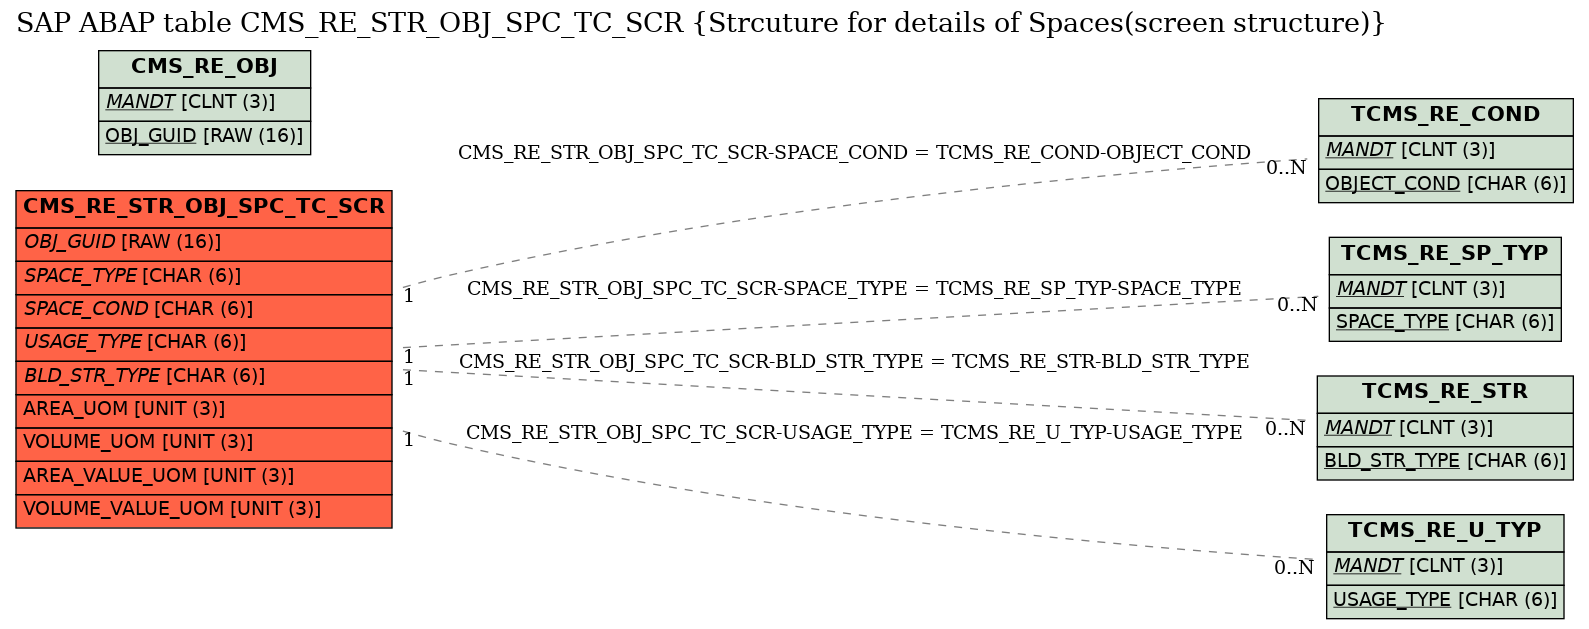 E-R Diagram for table CMS_RE_STR_OBJ_SPC_TC_SCR (Strcuture for details of Spaces(screen structure))